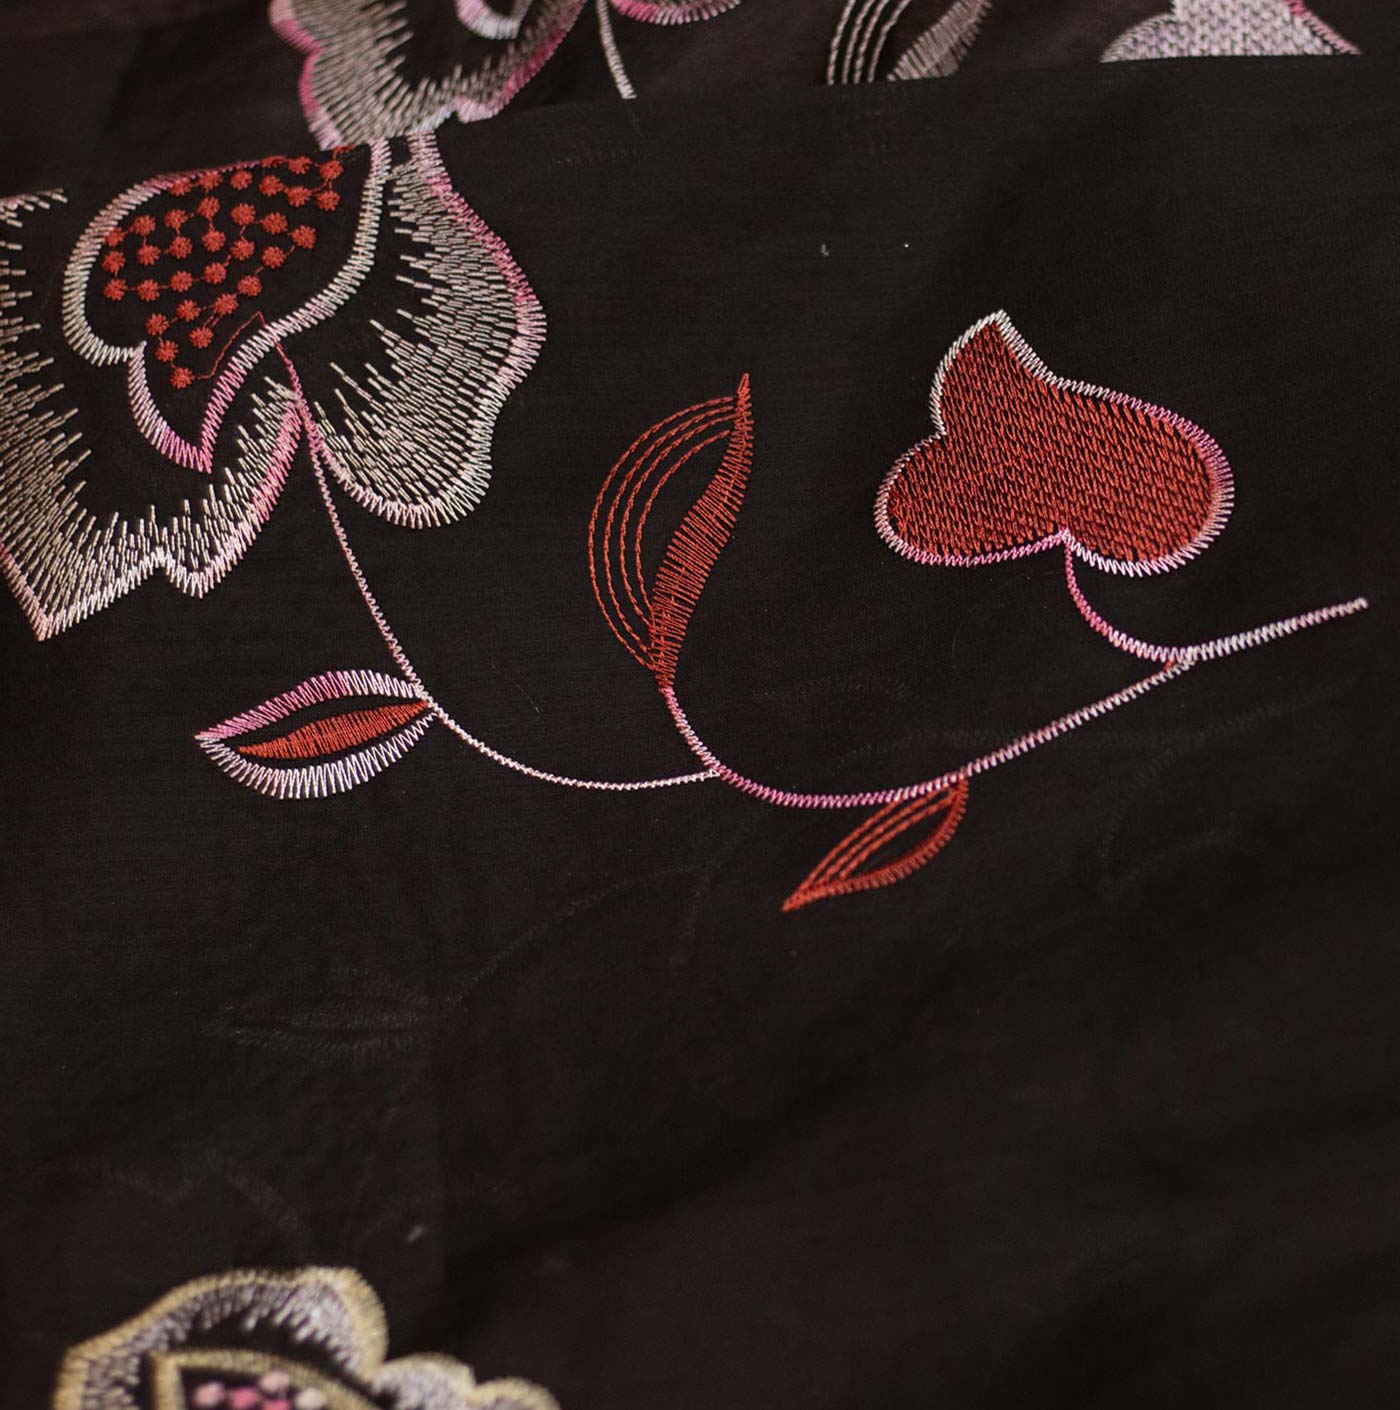 Black and Red Mixed Floral Embroidered Cotton Fabric